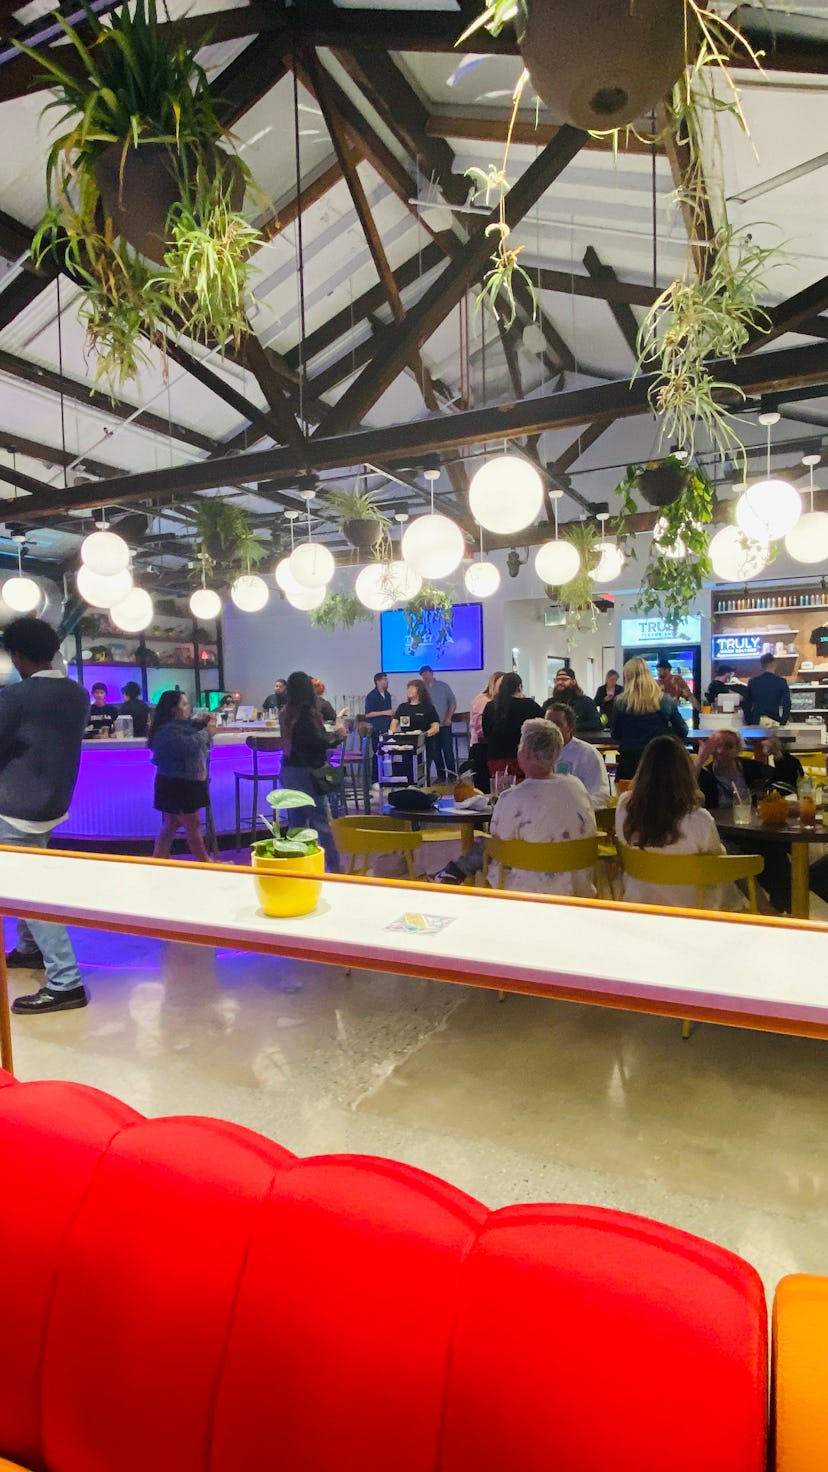 Photos of the Truly LA taproom show how vibrant the decor is. 